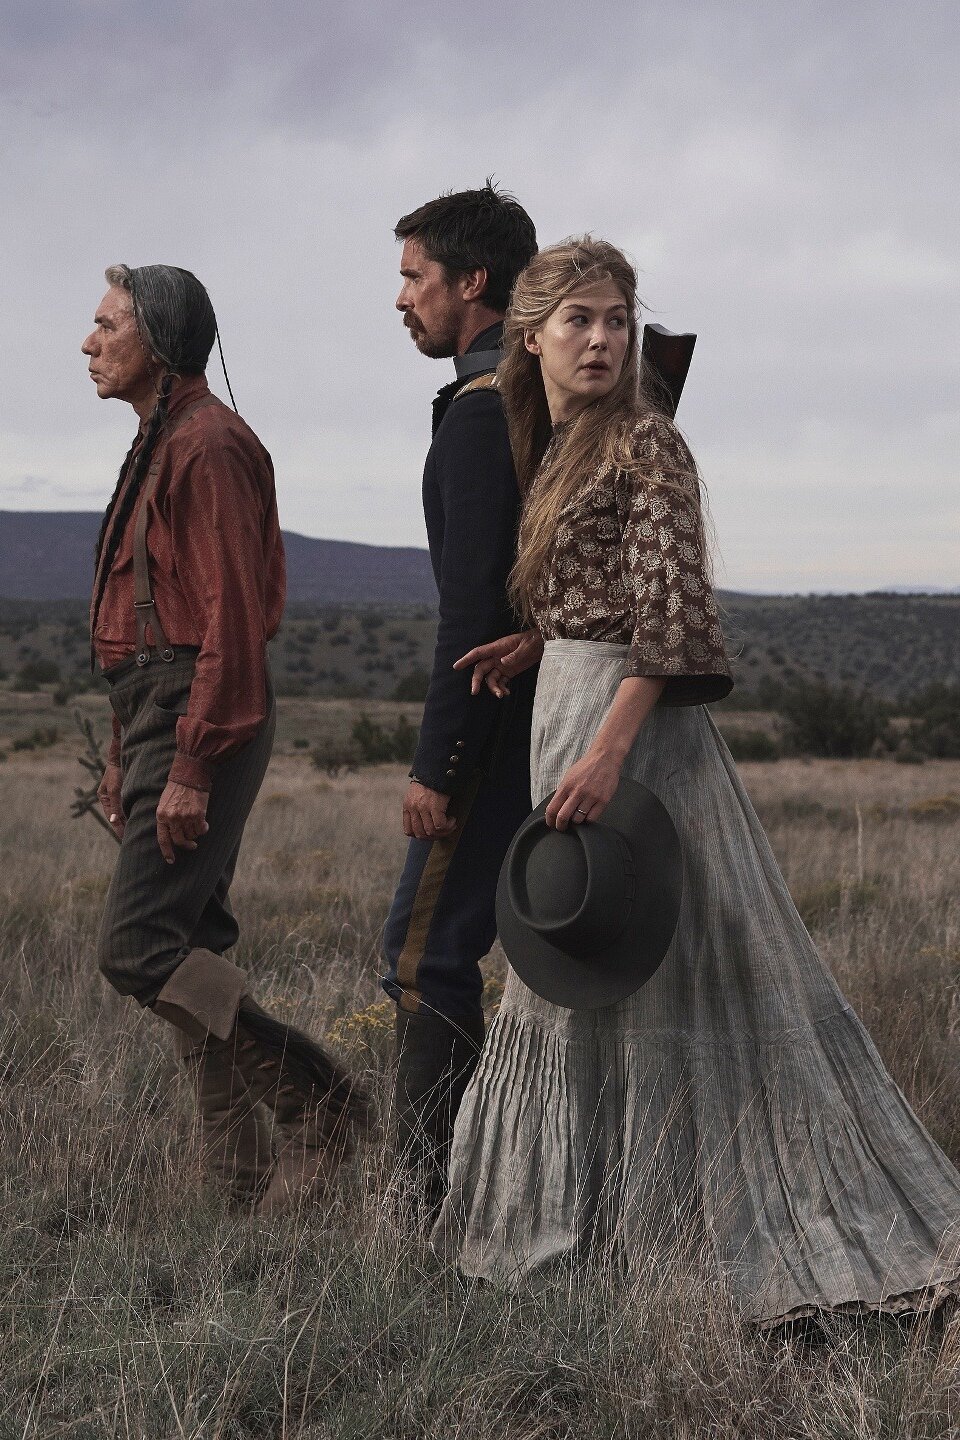 hostiles movie review rotten tomatoes